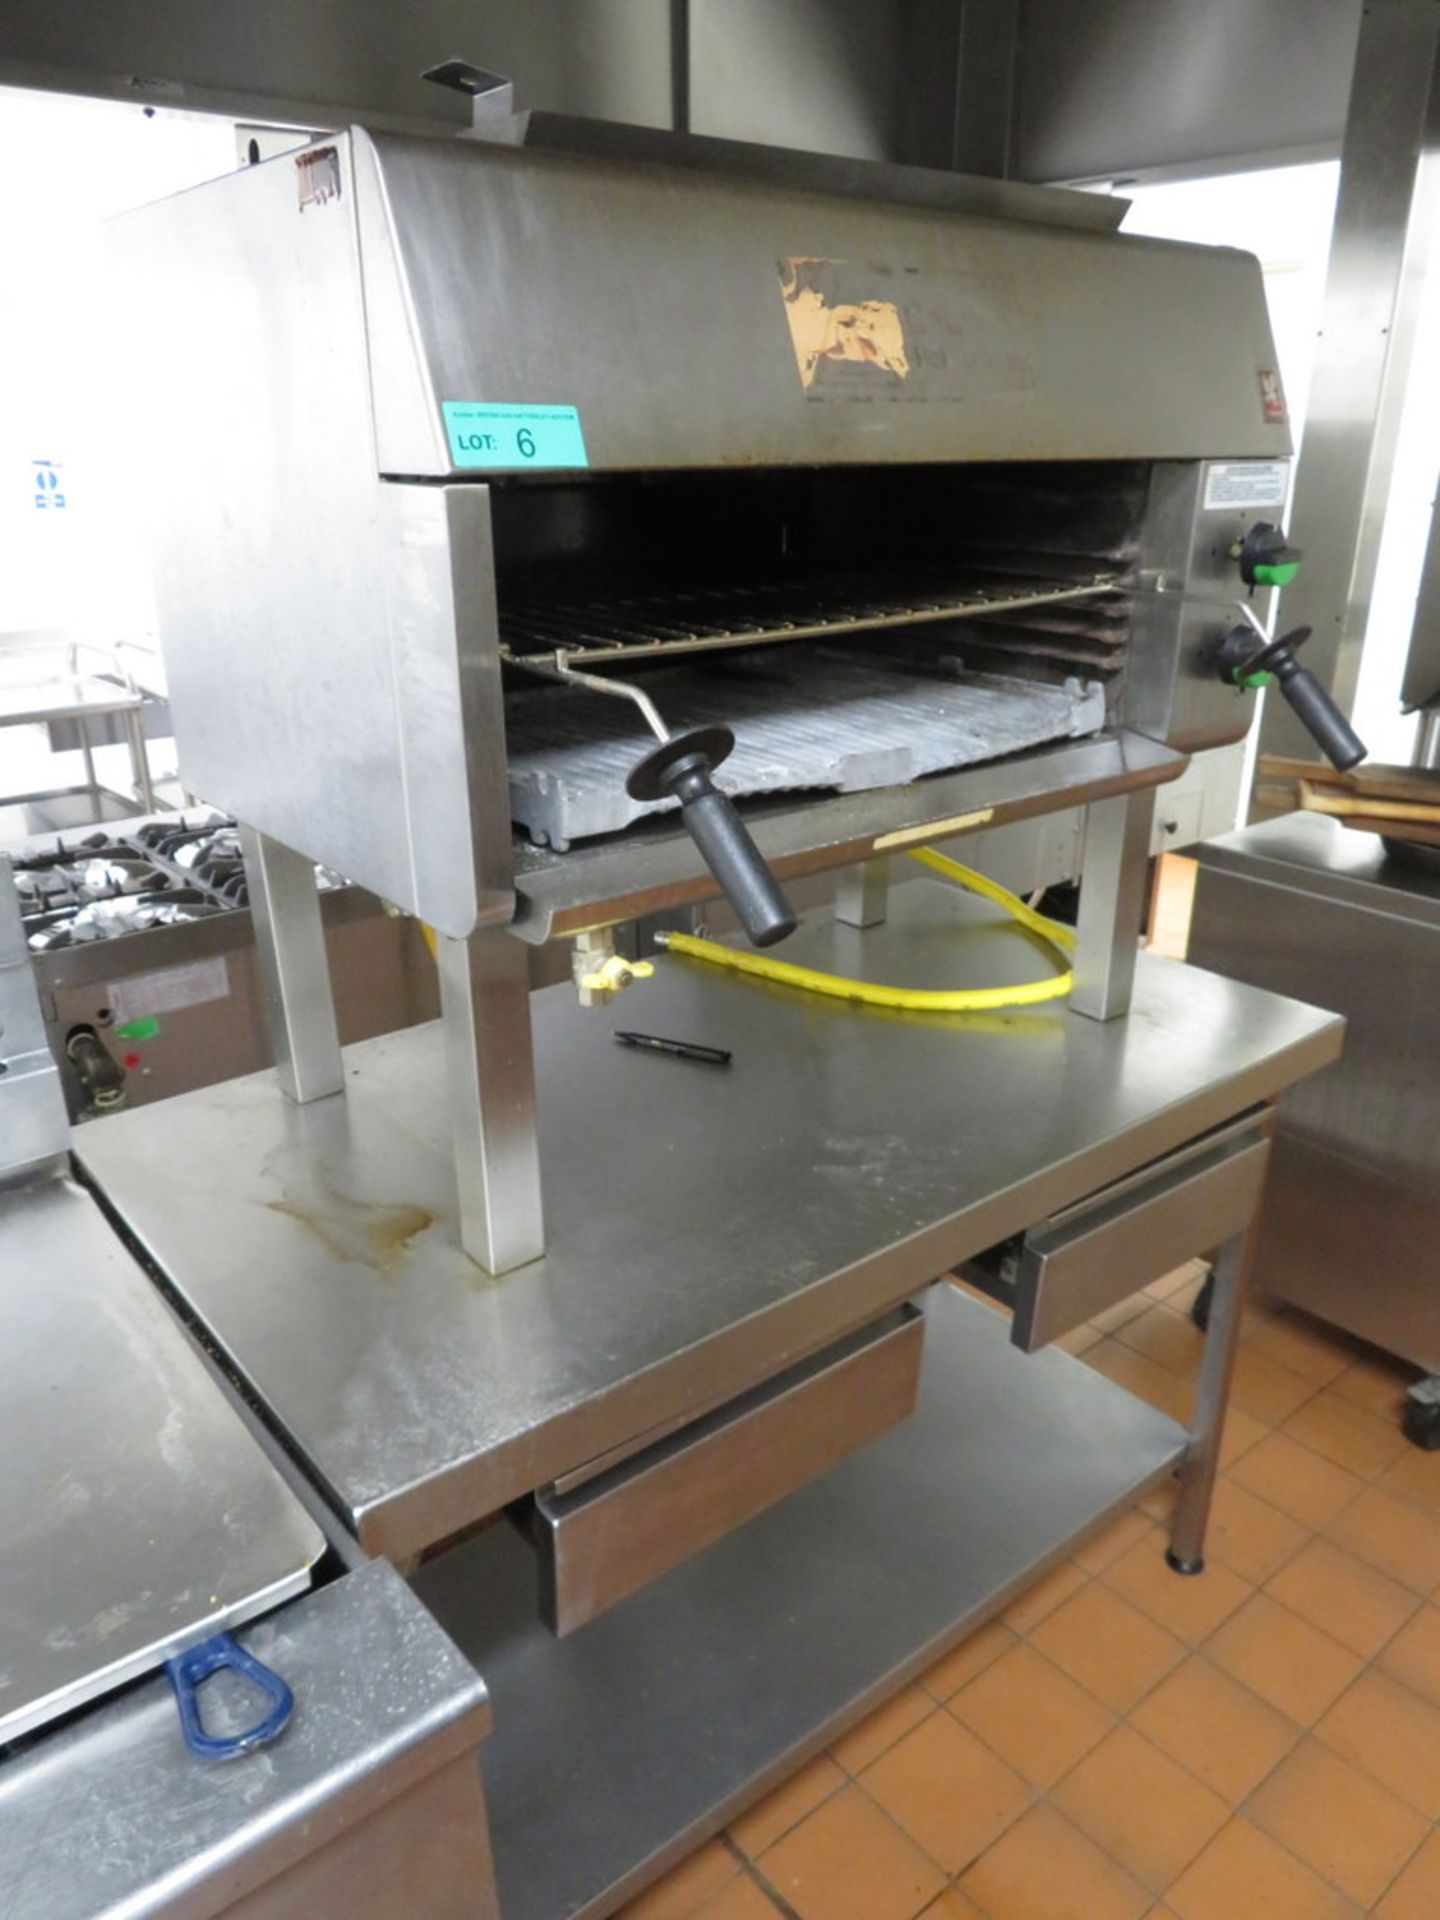 Falcon G1528 Salamander Gas Grill With Stainless Steel Prep Table - Image 5 of 7